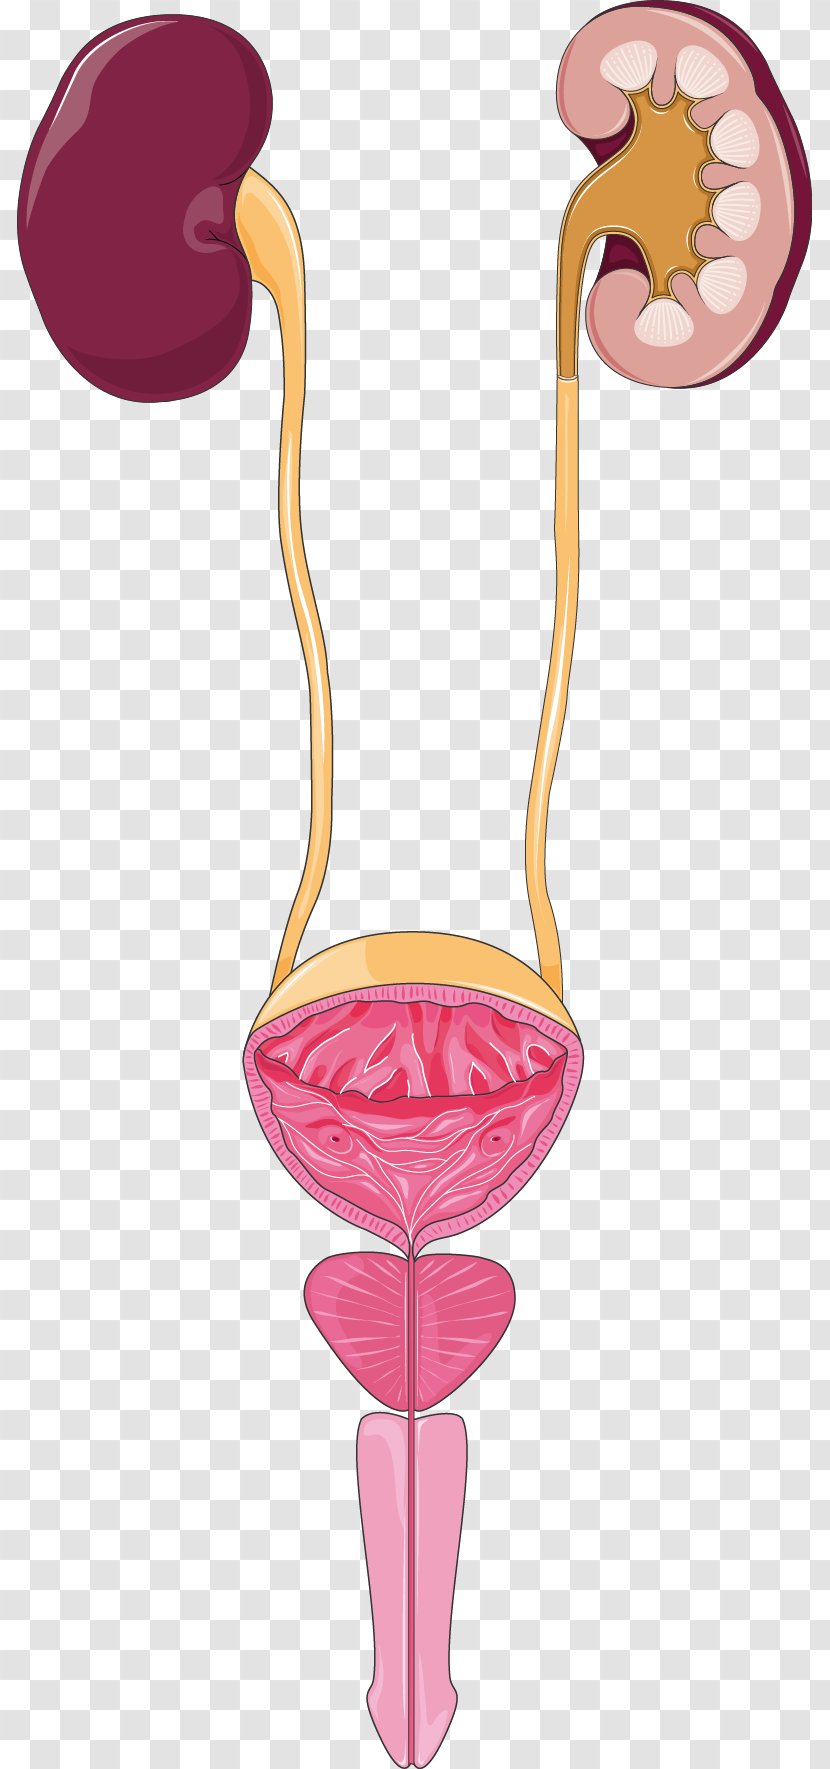 Excretory System Urine Urinary Tract Infection Kidney - Cartoon - Flower Transparent PNG